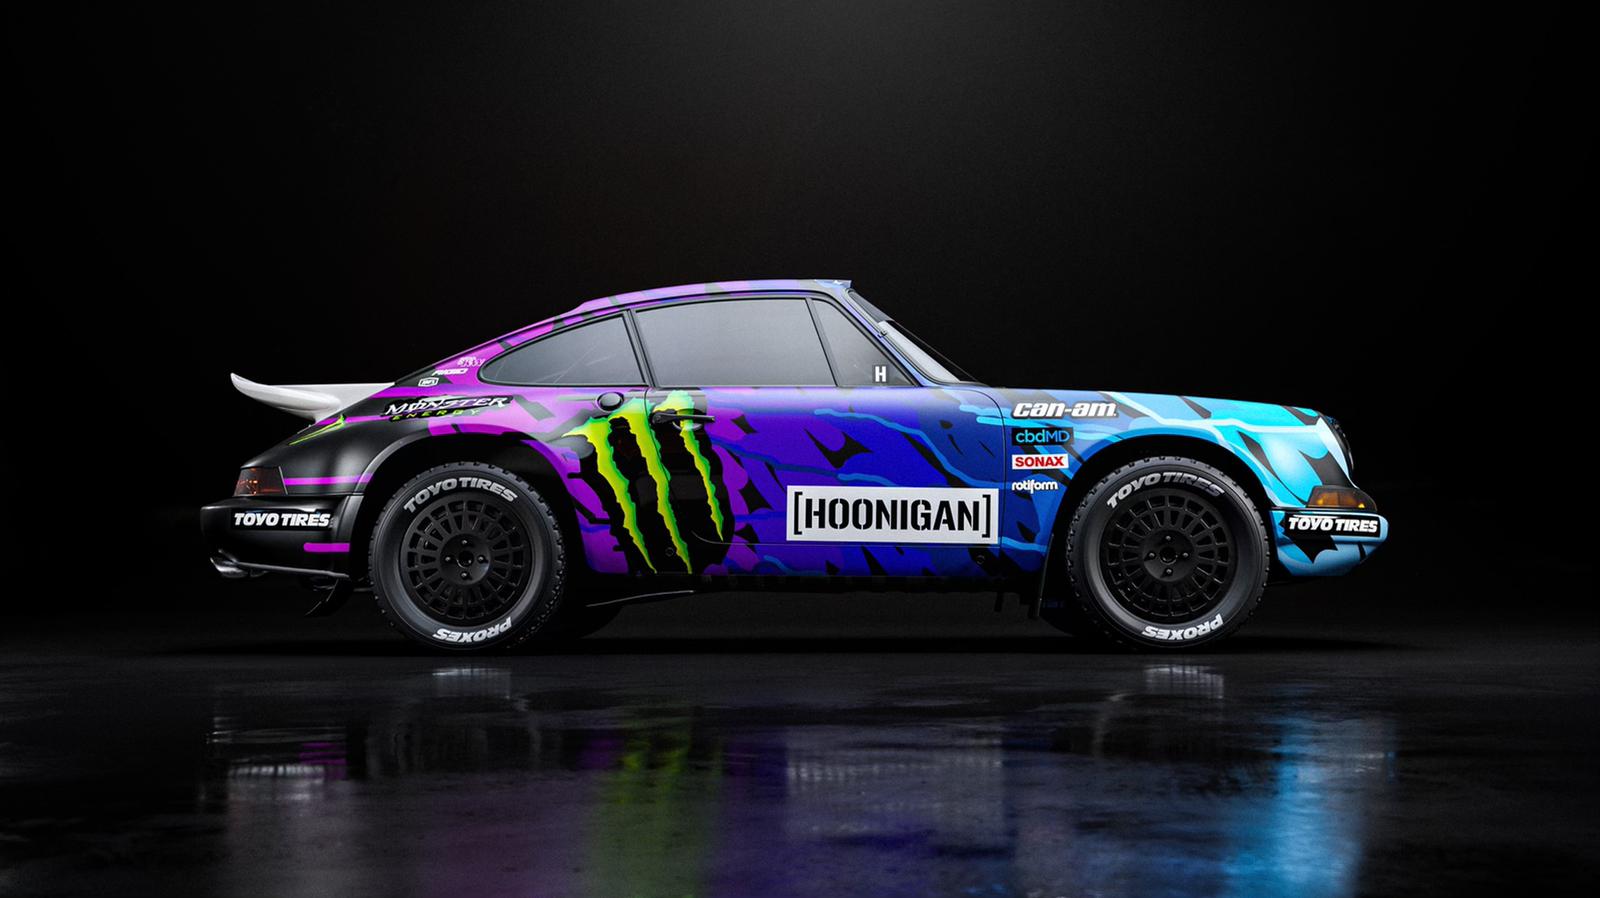 Ken Block joins Tuthill Porsche for the 2021 East African Safari Classic Rally